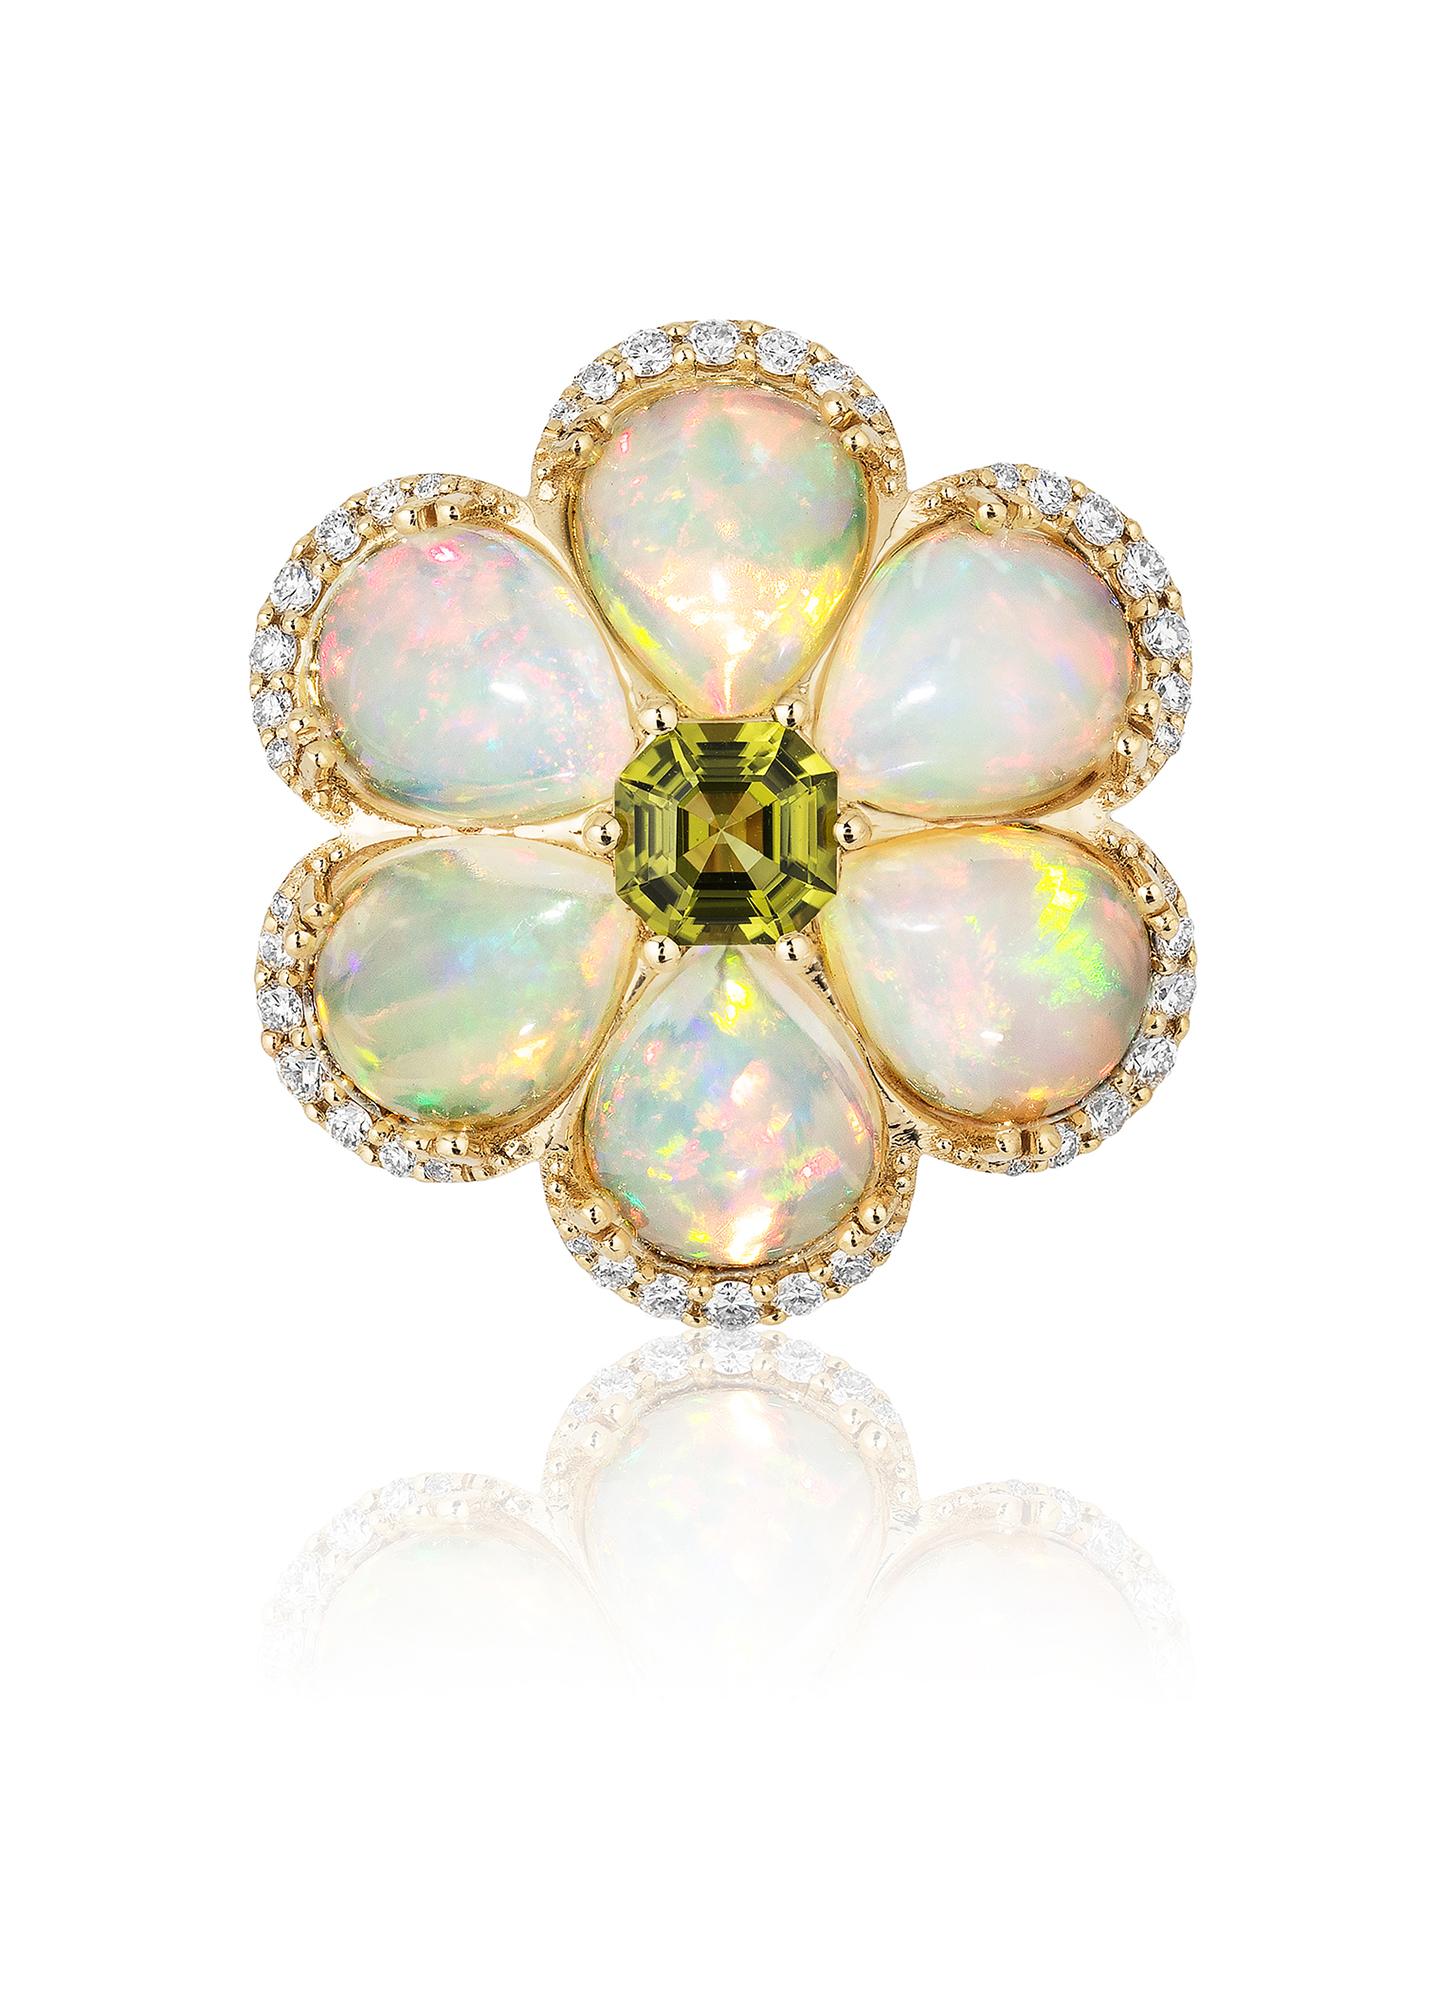 Pear Shape Opal Cabochon And Peridot Flower Ring With Diamonds in 18K Yellow Gold, from 'G-One' Collection 

Approx. Wt: 5.92 Carats (Opal), 0.60 Carats (Peridot)

Diamonds: G-H / VS, Approx. Wt: 0.43 Carats